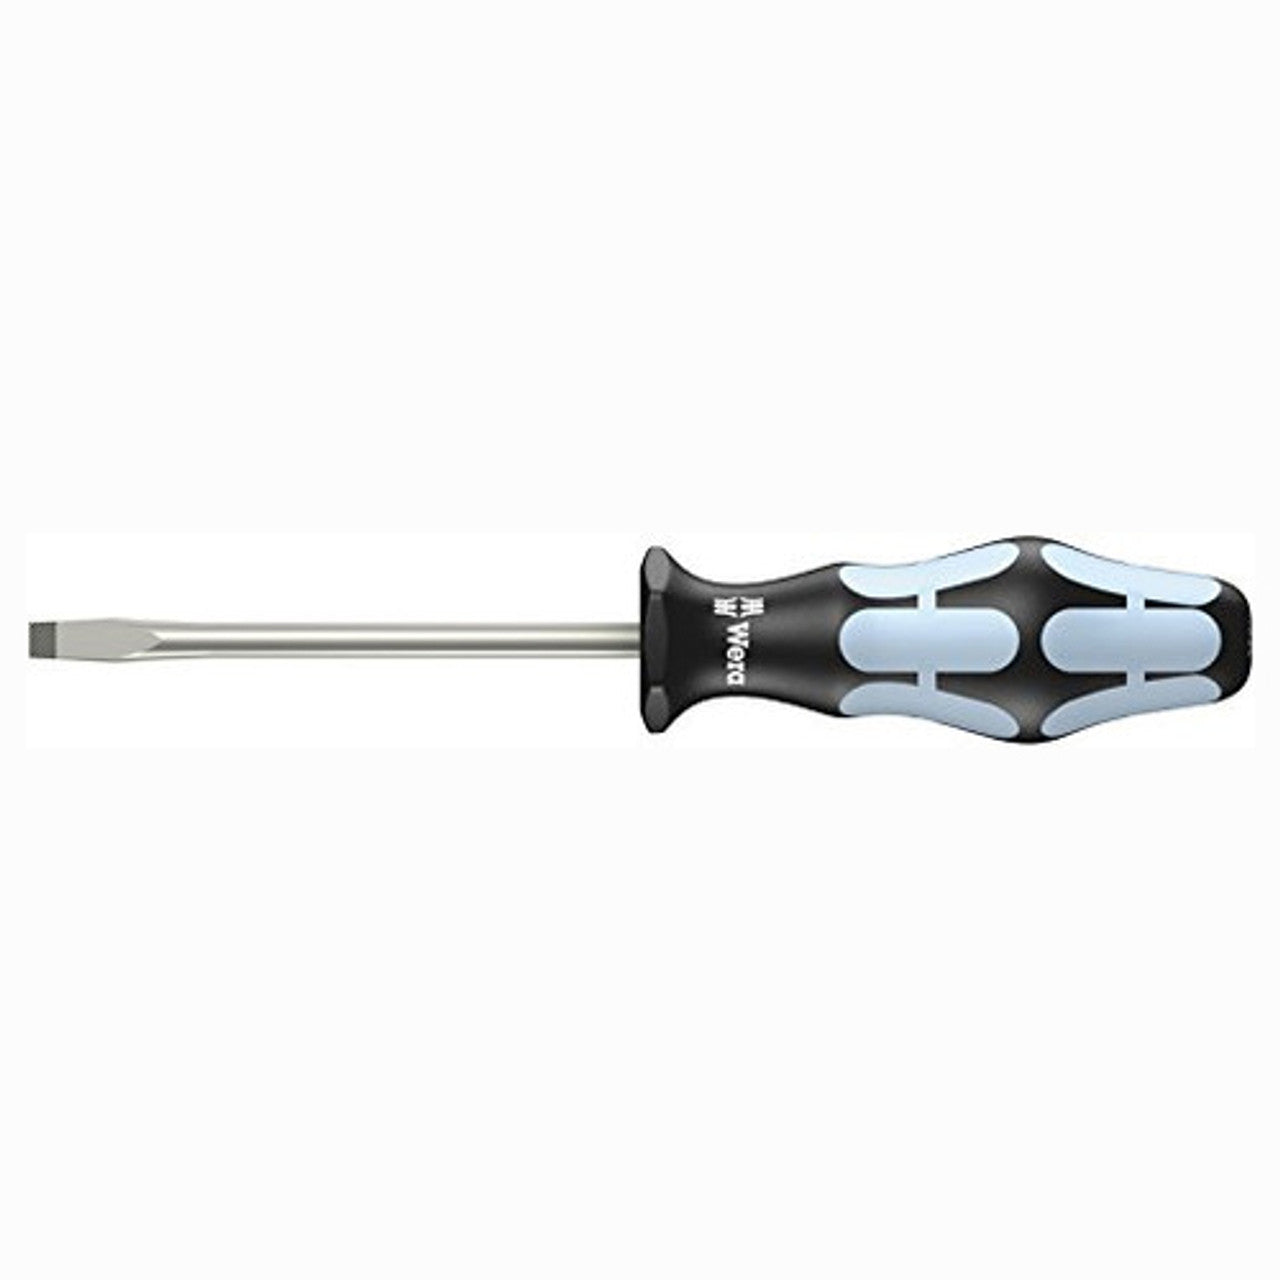 Wera 05032005001 1/4" Blade Width, 6" Blade, 10.04" Overall Slotted Screwdriver